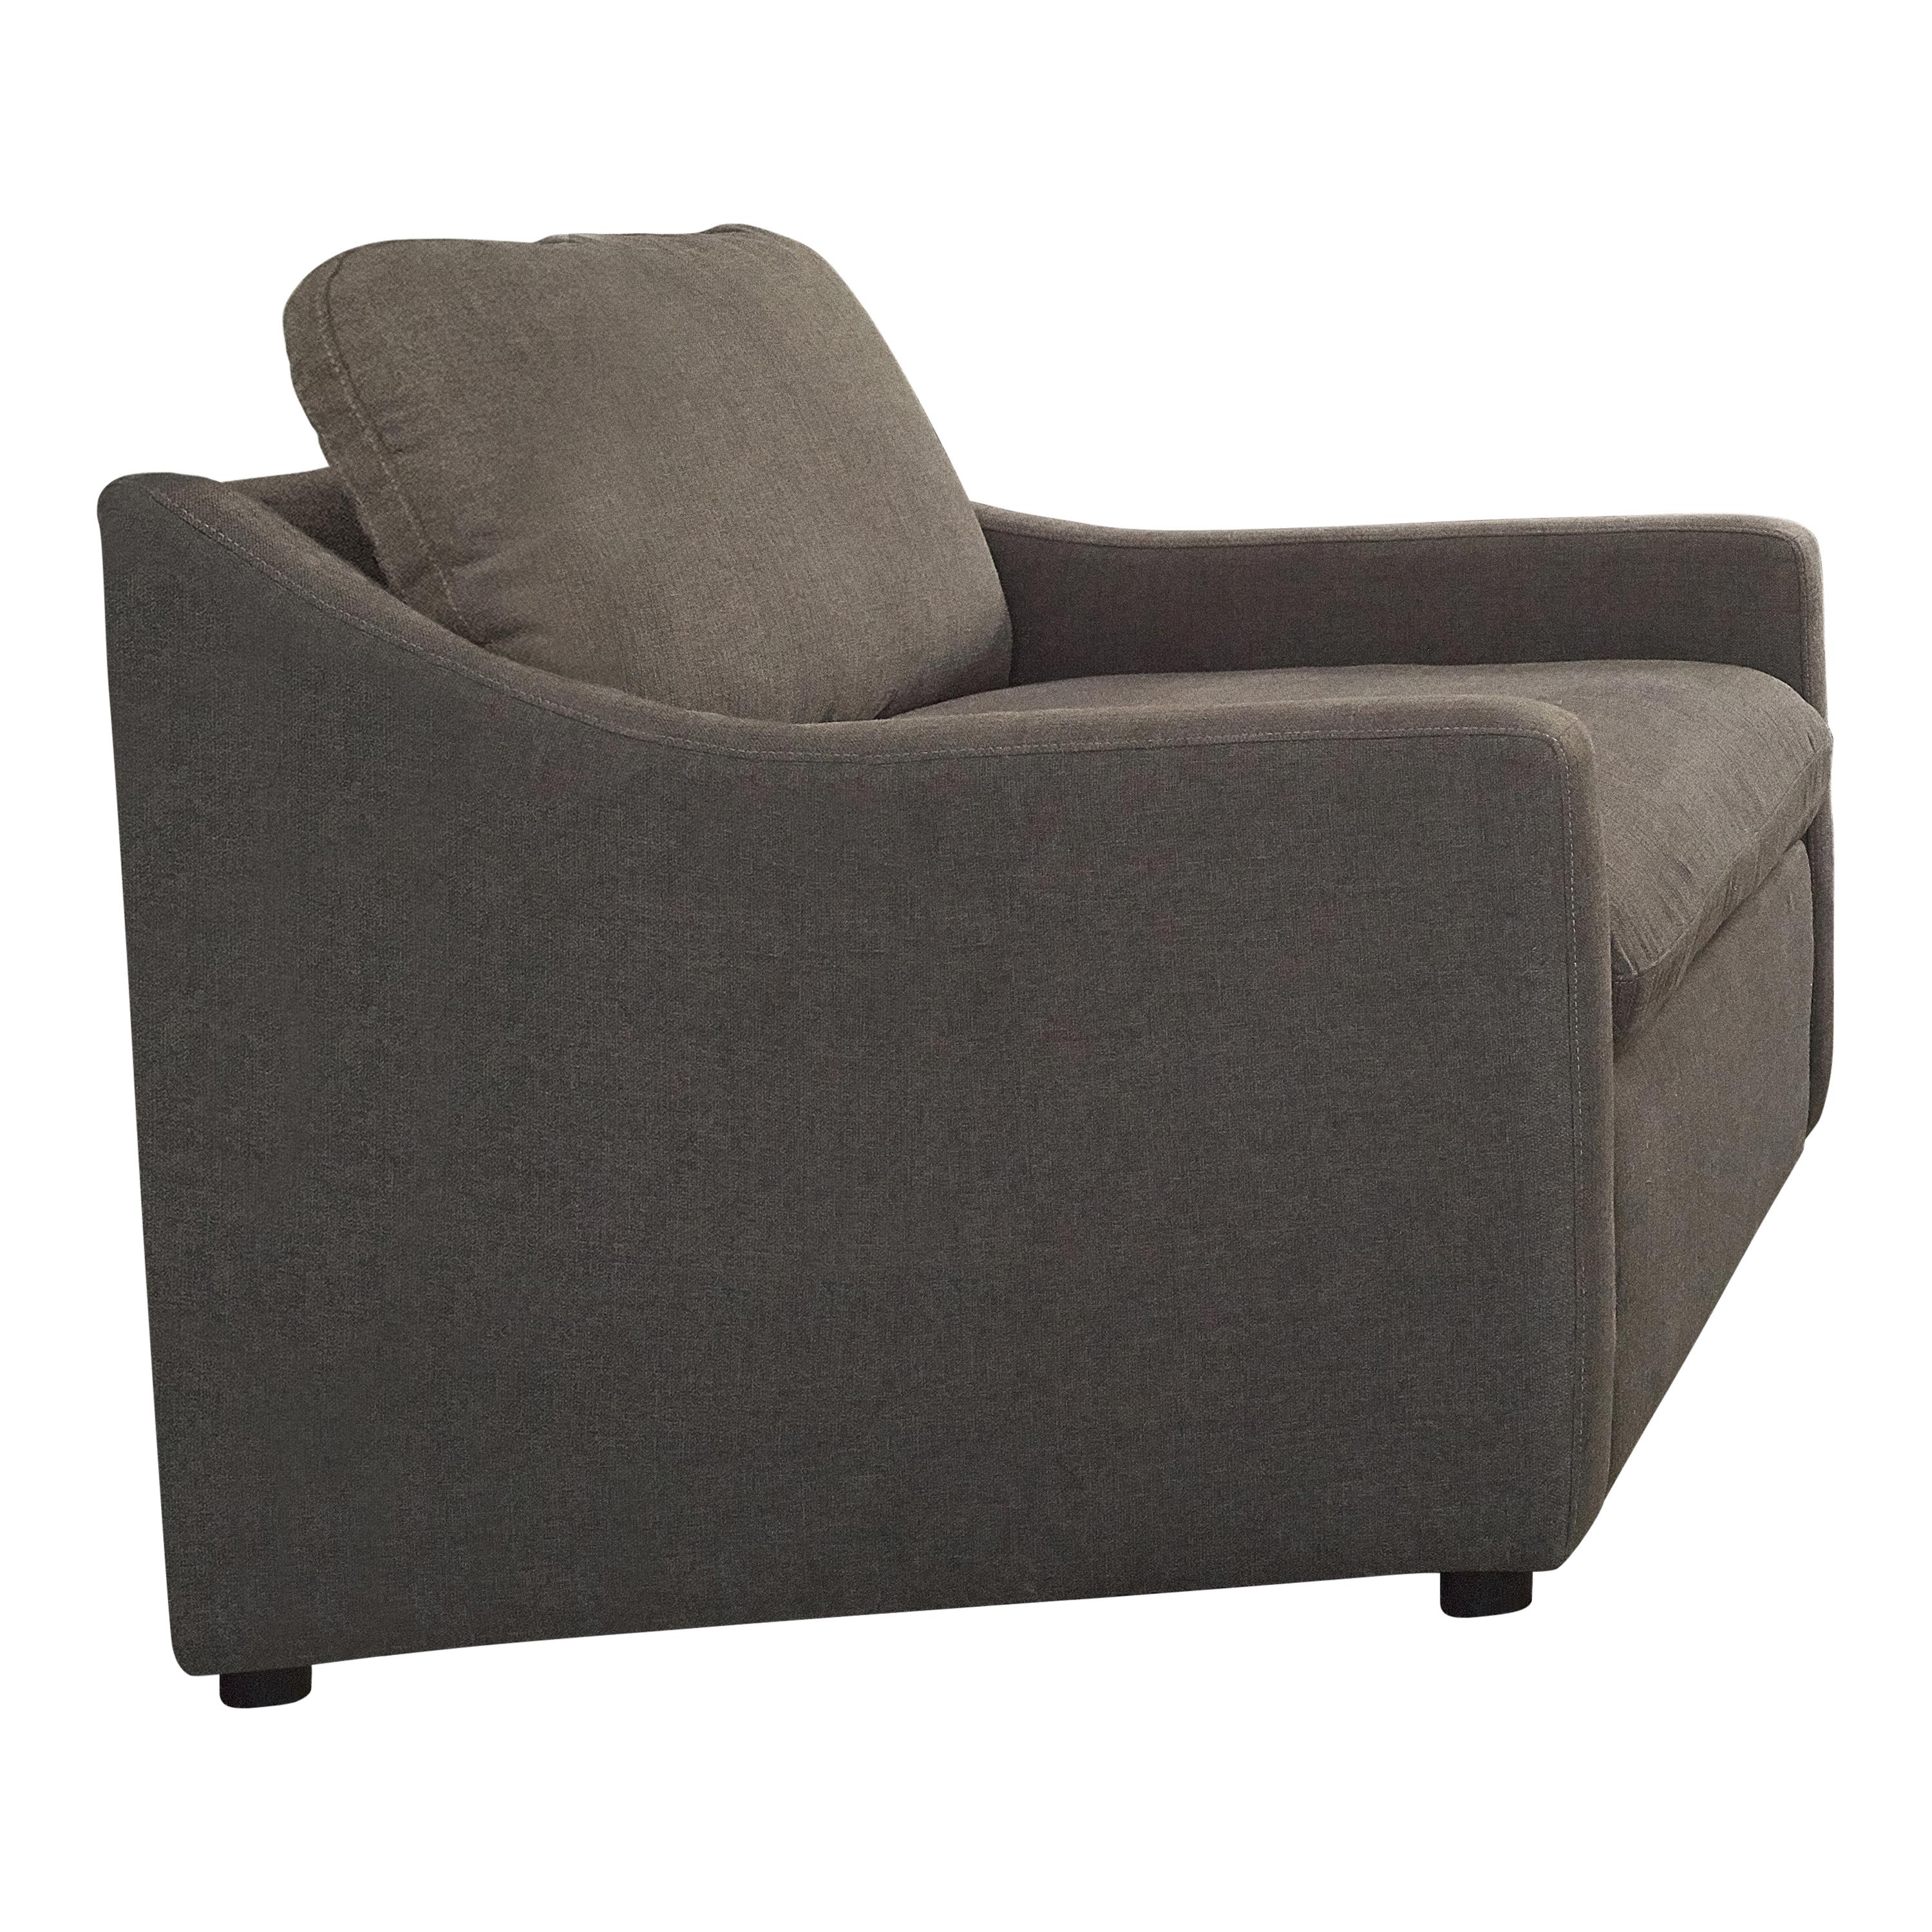 Transitional Arm Chair 509383 Contrary 509383 in Charcoal 